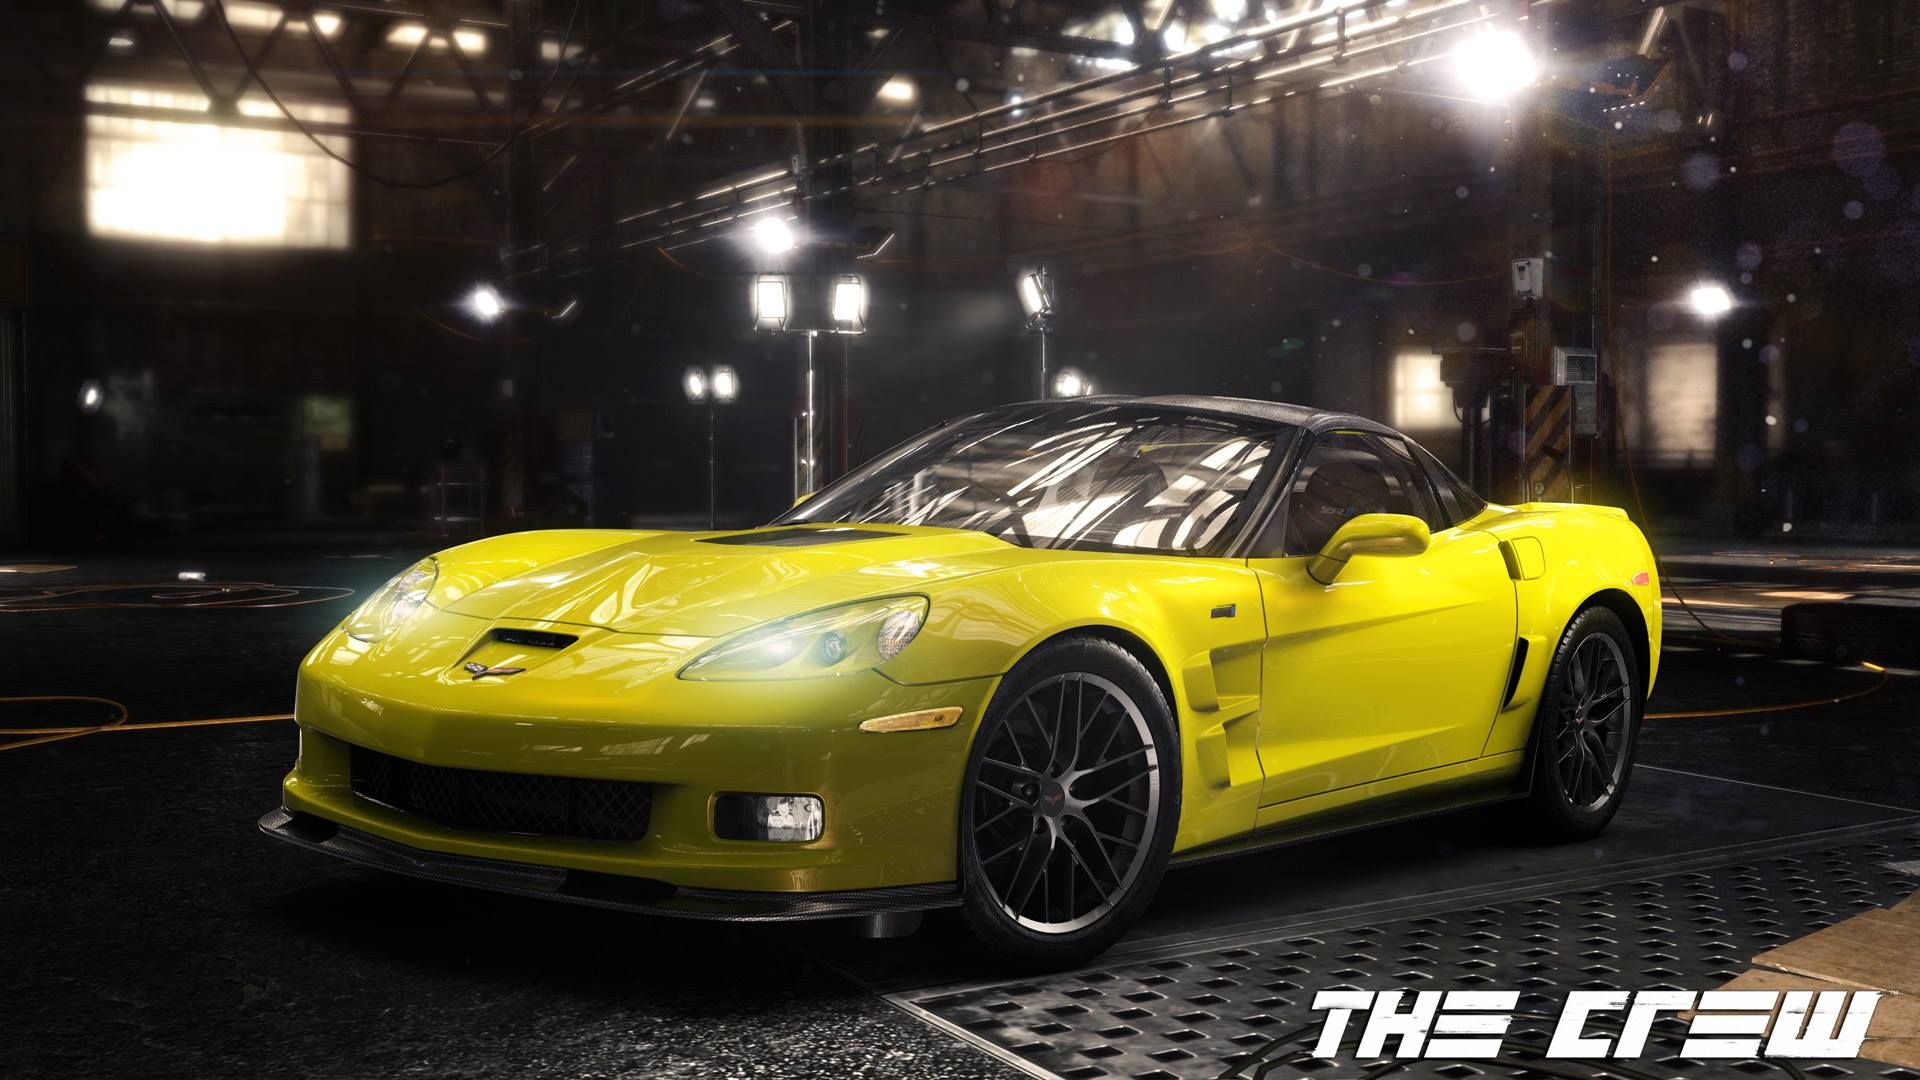 Chevrolet-Corvette-appears-in-latest-screenshot-from-The-Crew